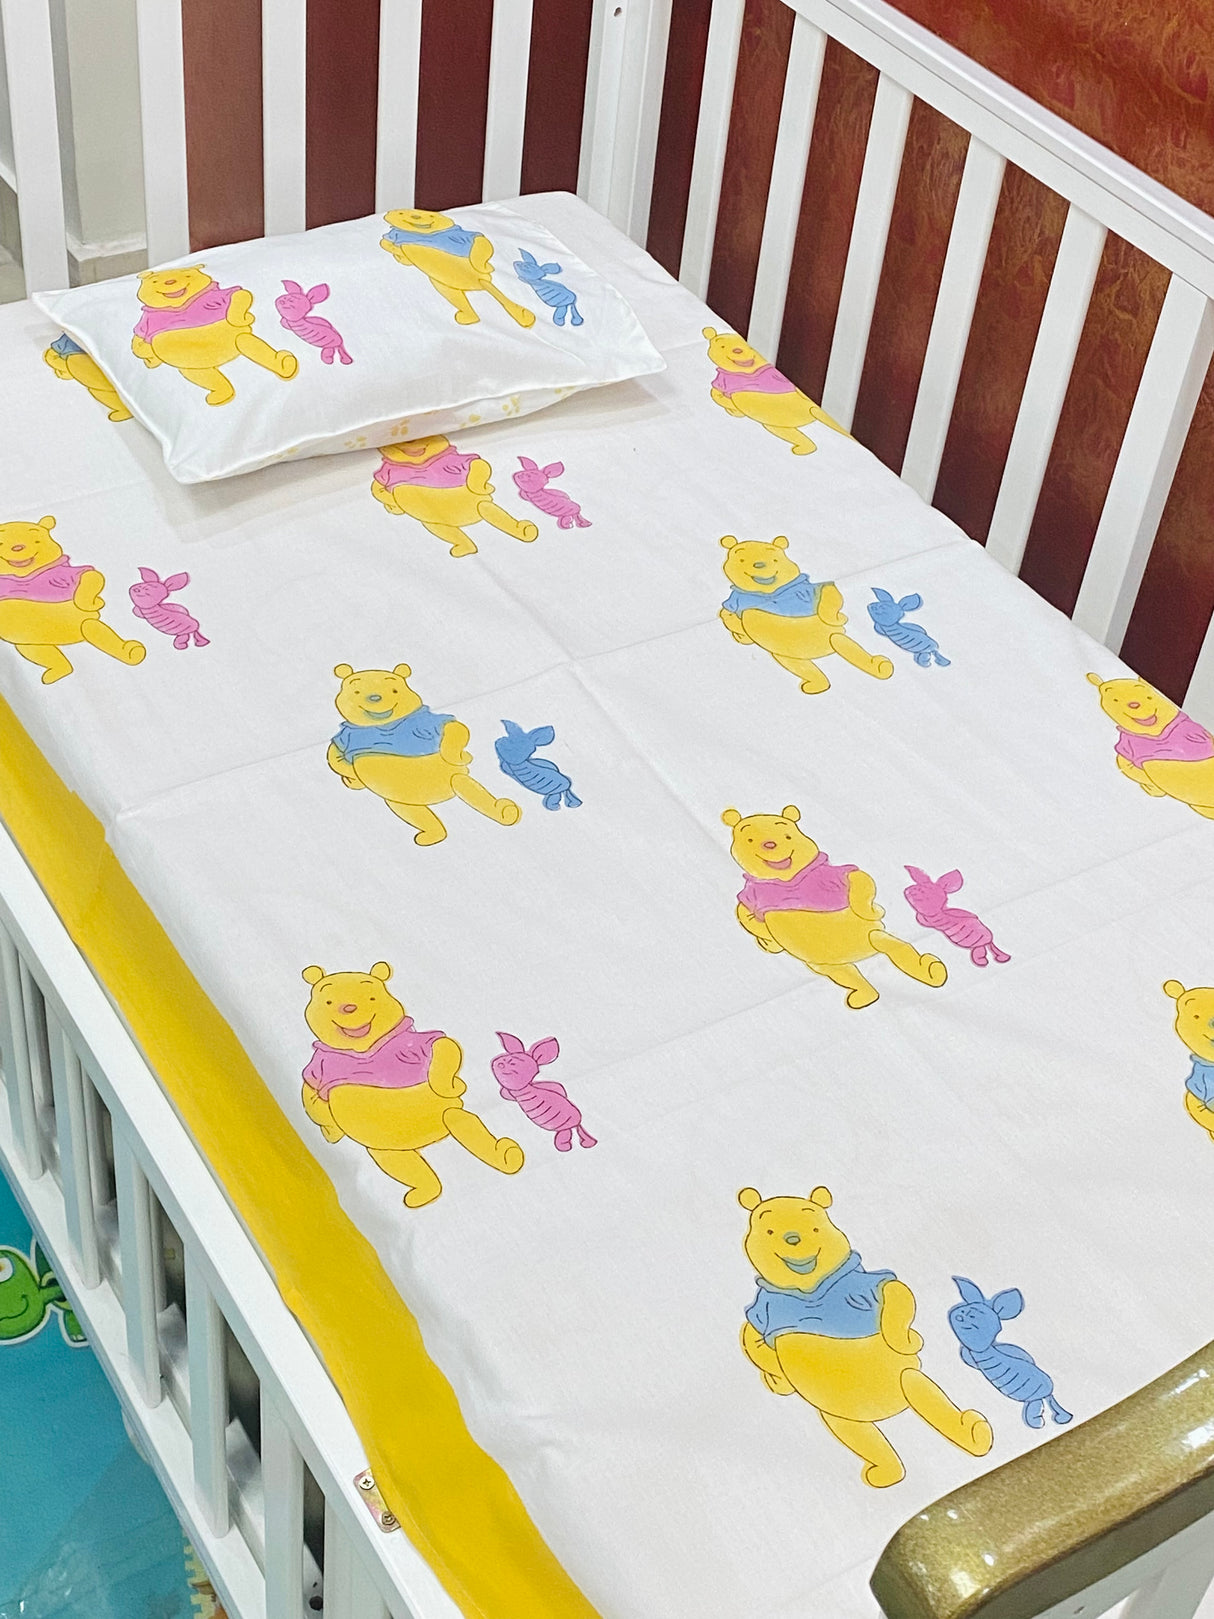 Cot Sheet- Pooh Blockprint Cotton -Cot Size (60-40 inches)